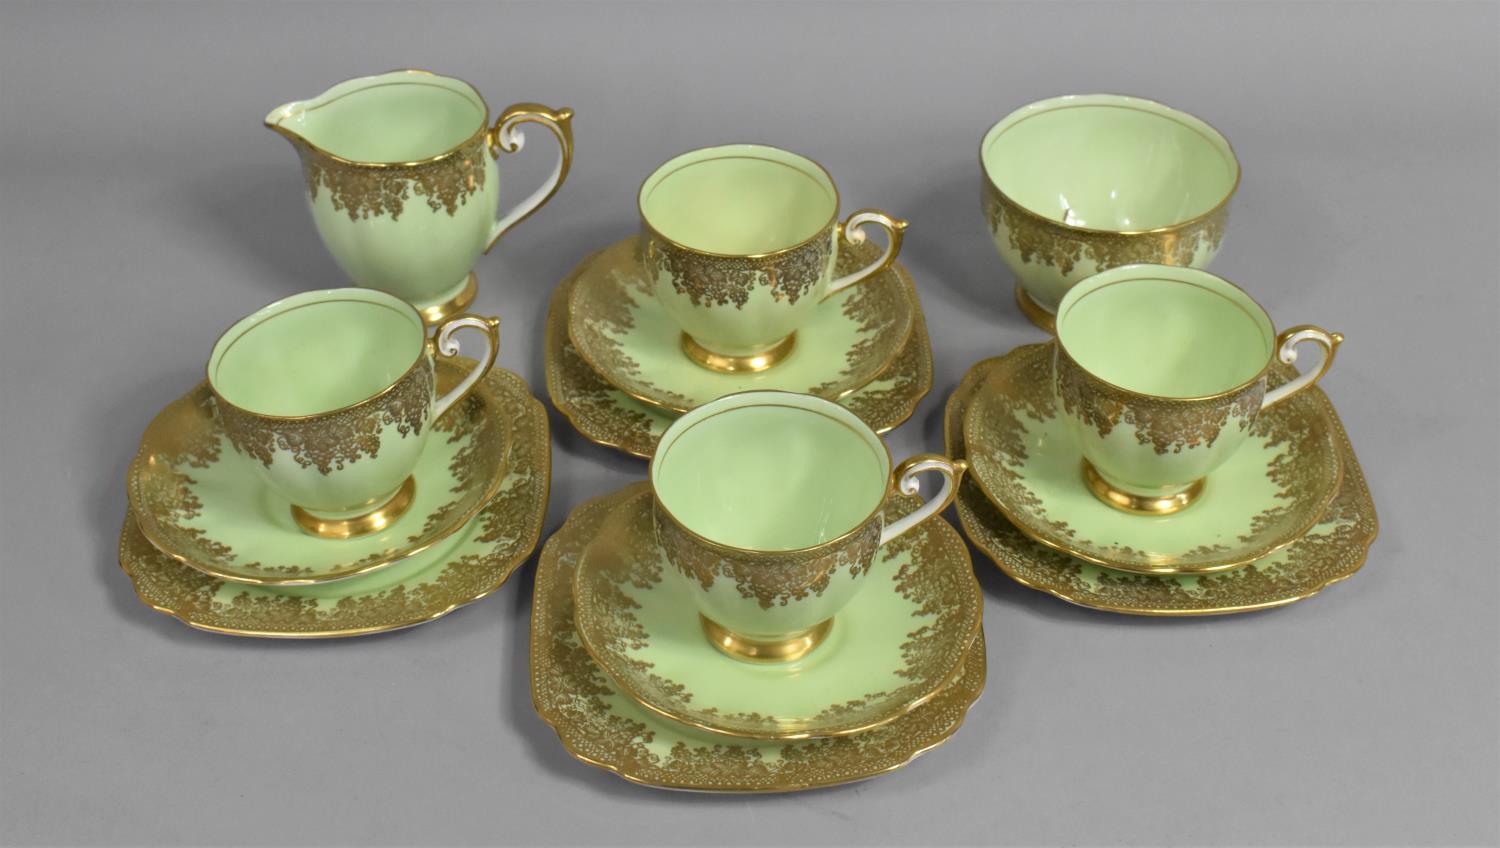 A Bell China Green and Gilt Foliate Lace Trim Part Teaset to Comprise Four Cups, Saucers, Side